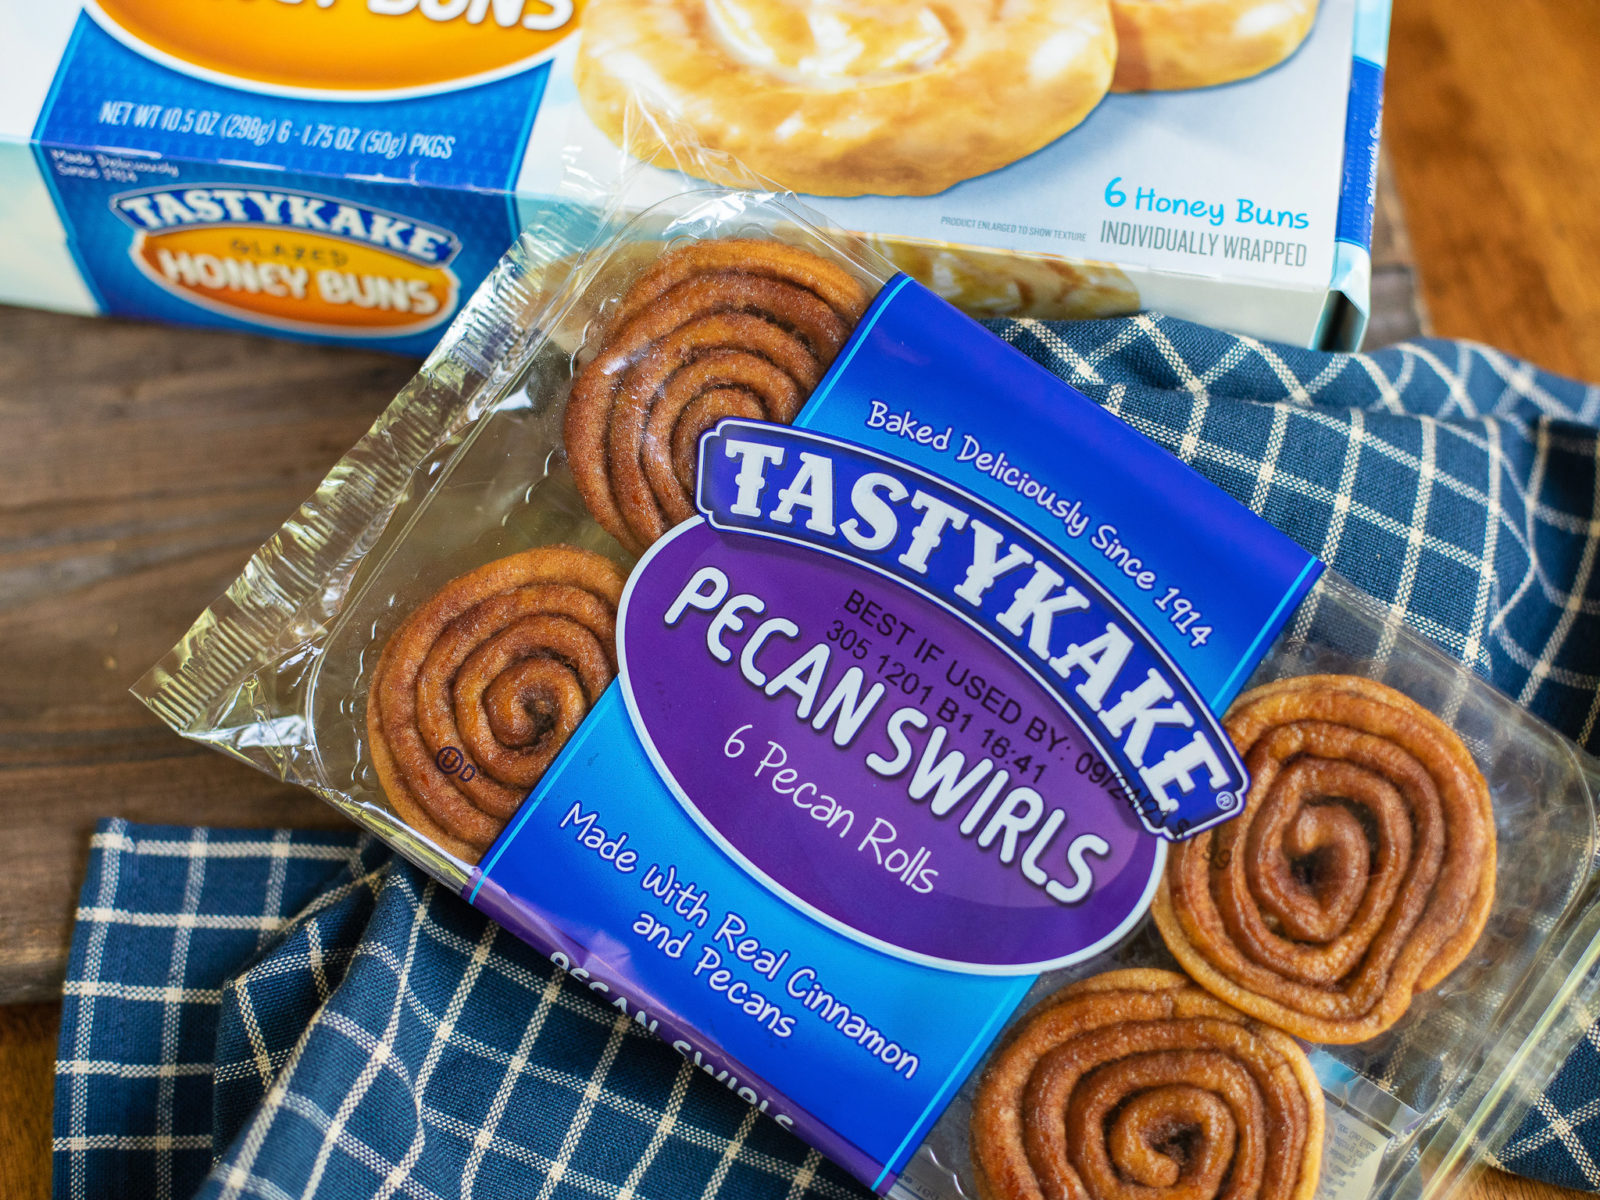 Tastykake Ibotta For The Publix BOGO Sale – Products As Low As 90¢